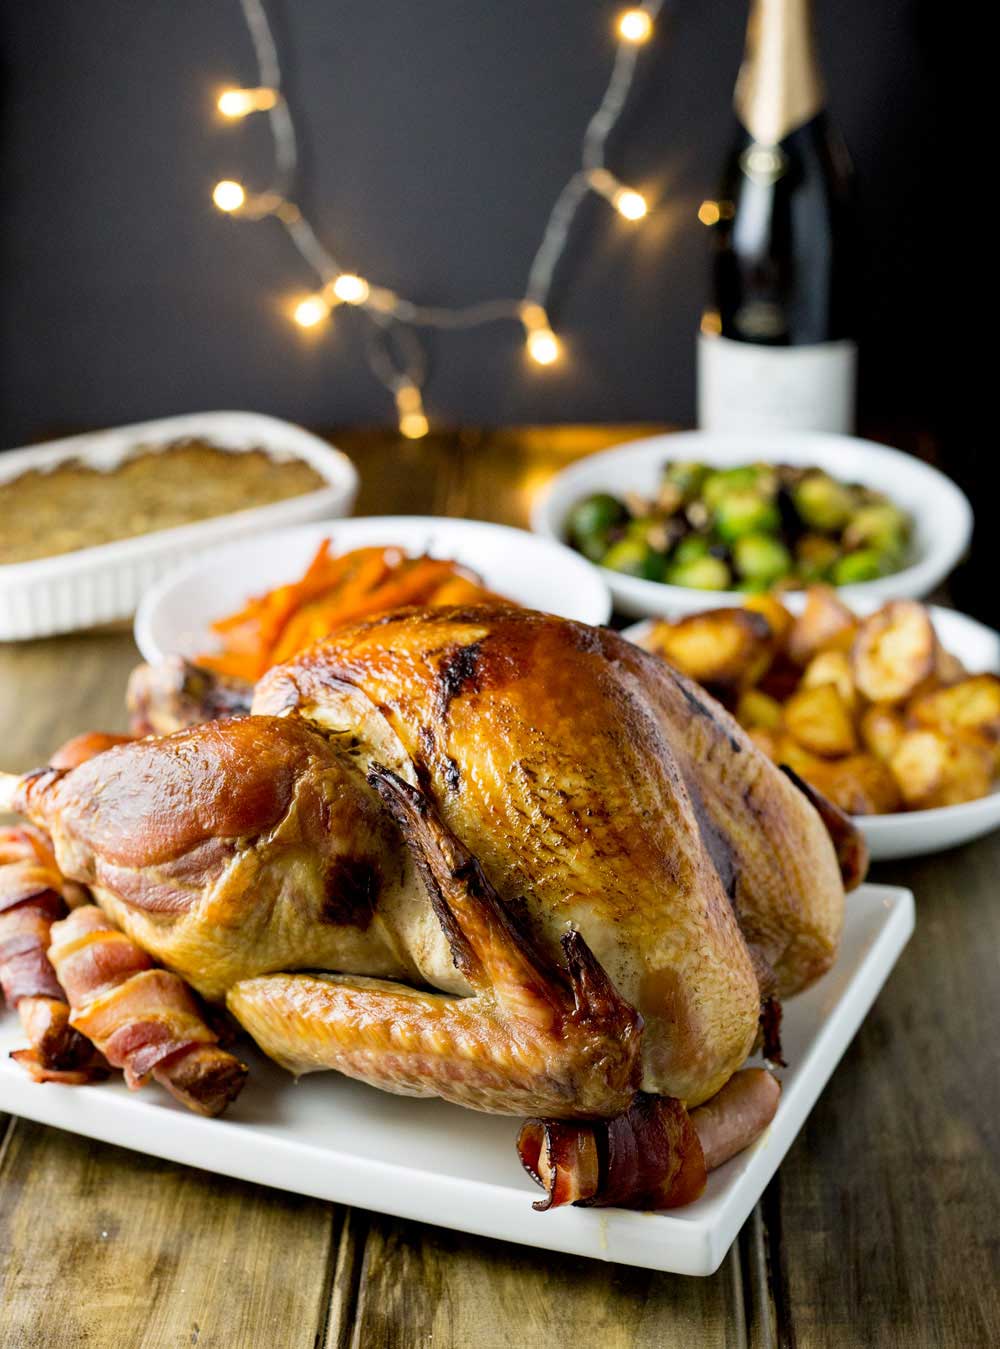 This slow roasted turkey is juicy and so simple. Without any basting, brining or intricate butter rubbing bacon weaving, you get a moist delicious bird.